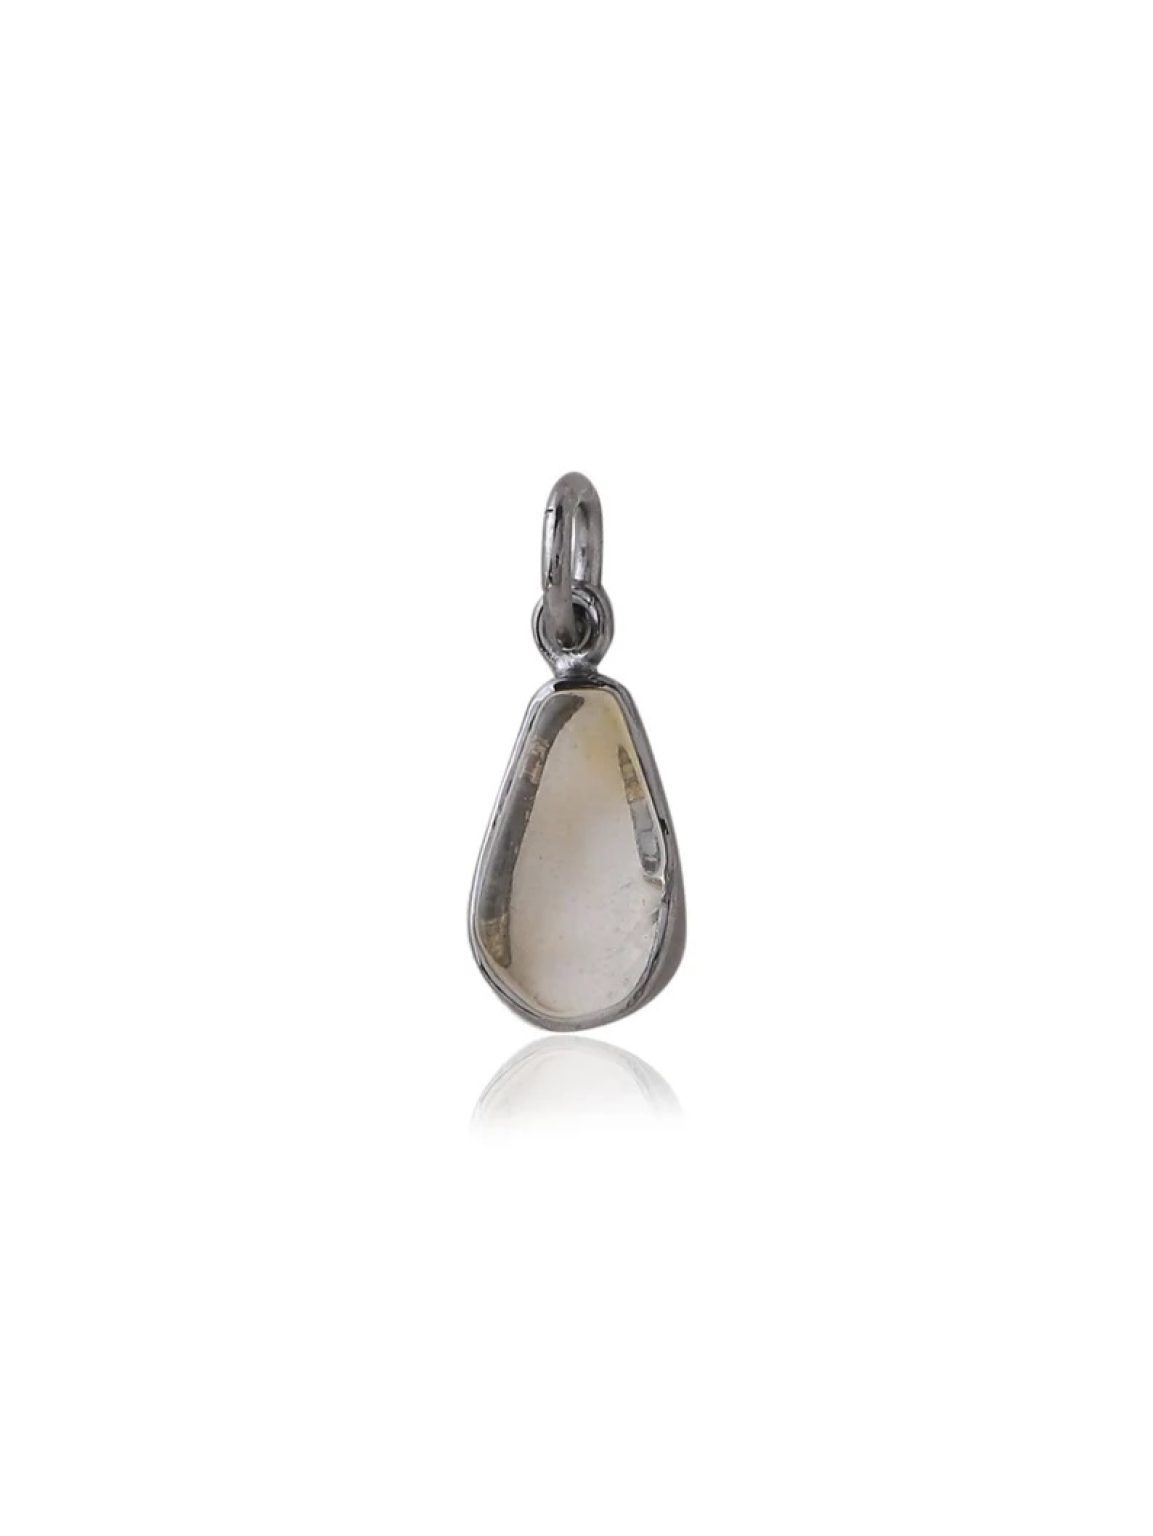 Citrine charm necklace silver 925. Dainty citrine necklace gold for women. Minimalist citrine charm neckalce in sterling silver.